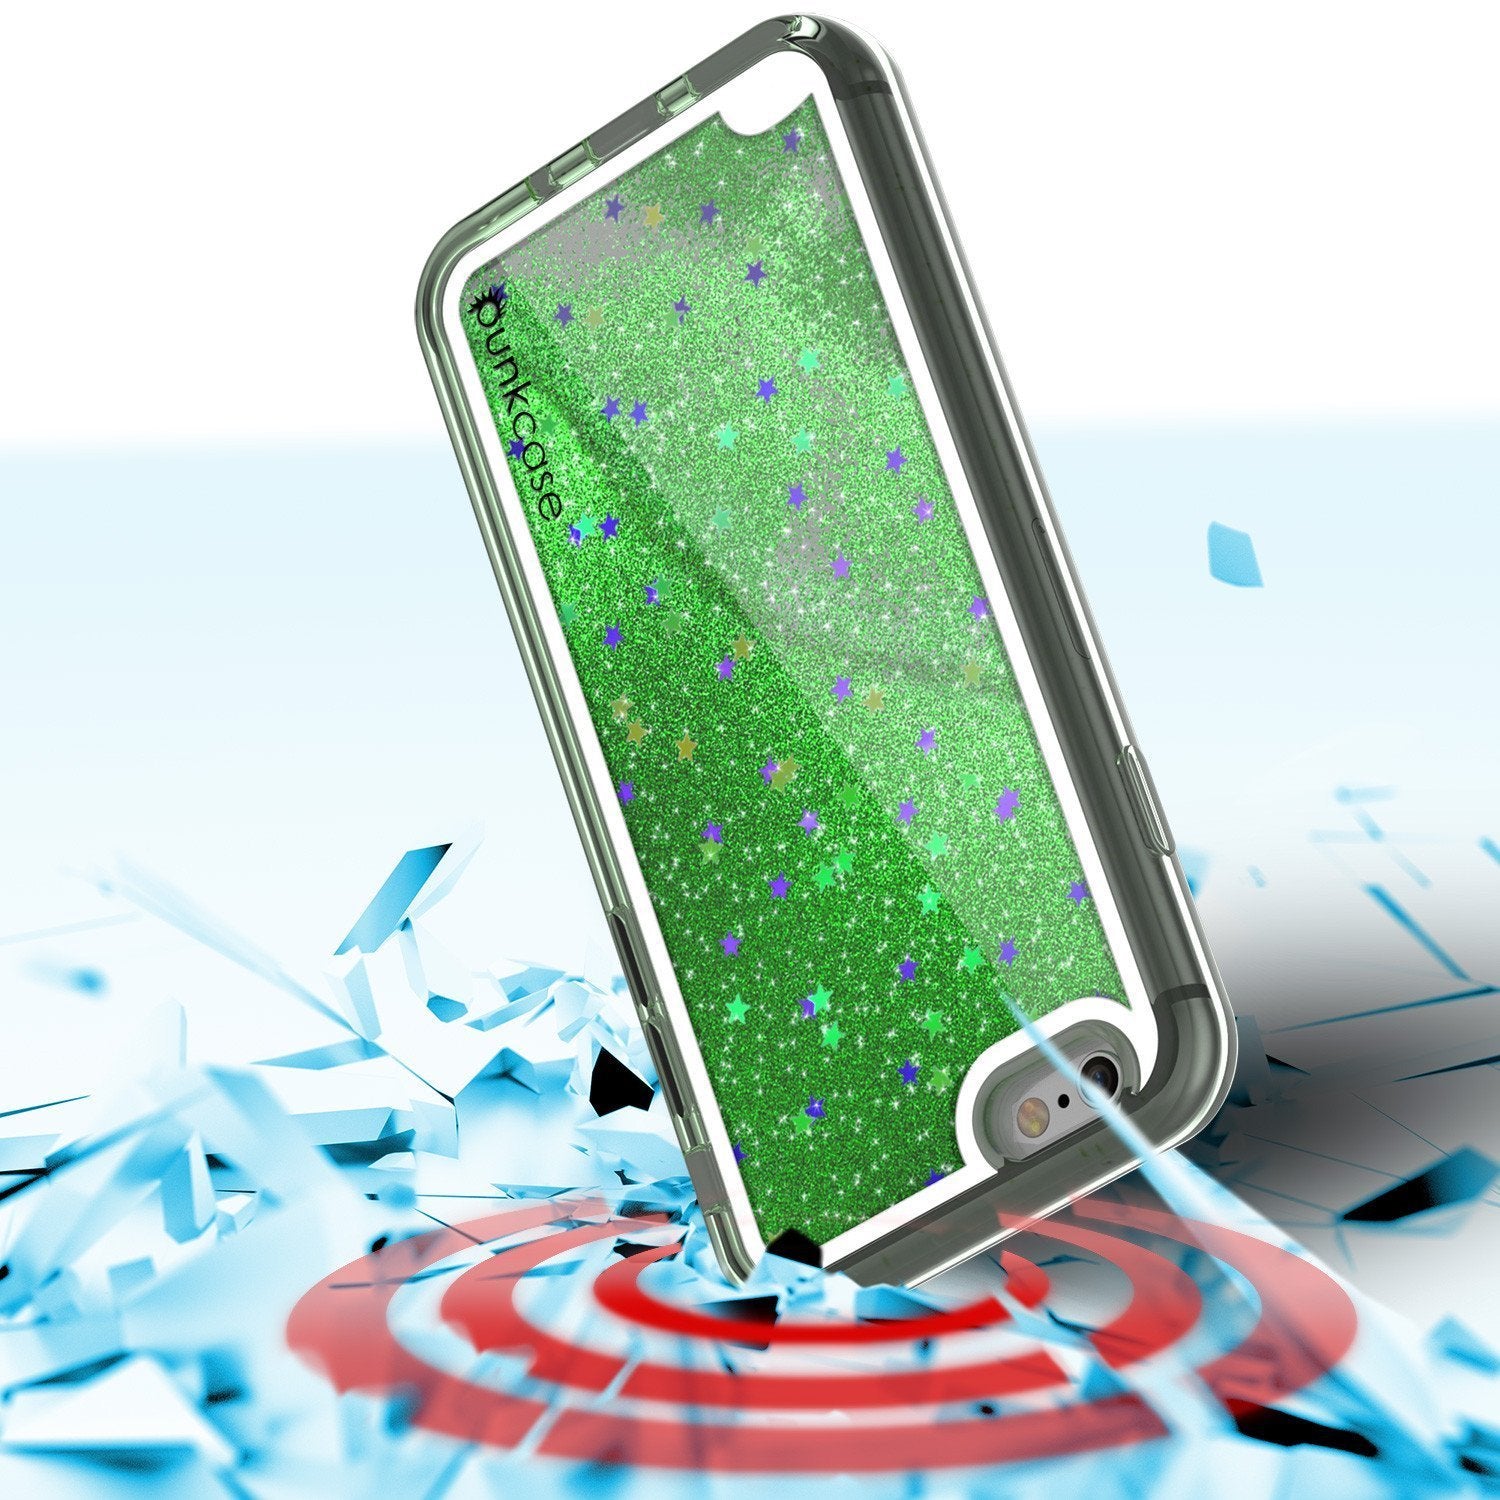 iPhone SE (4.7") Case, PunkCase LIQUID Green Series, Protective Dual Layer Floating Glitter Cover